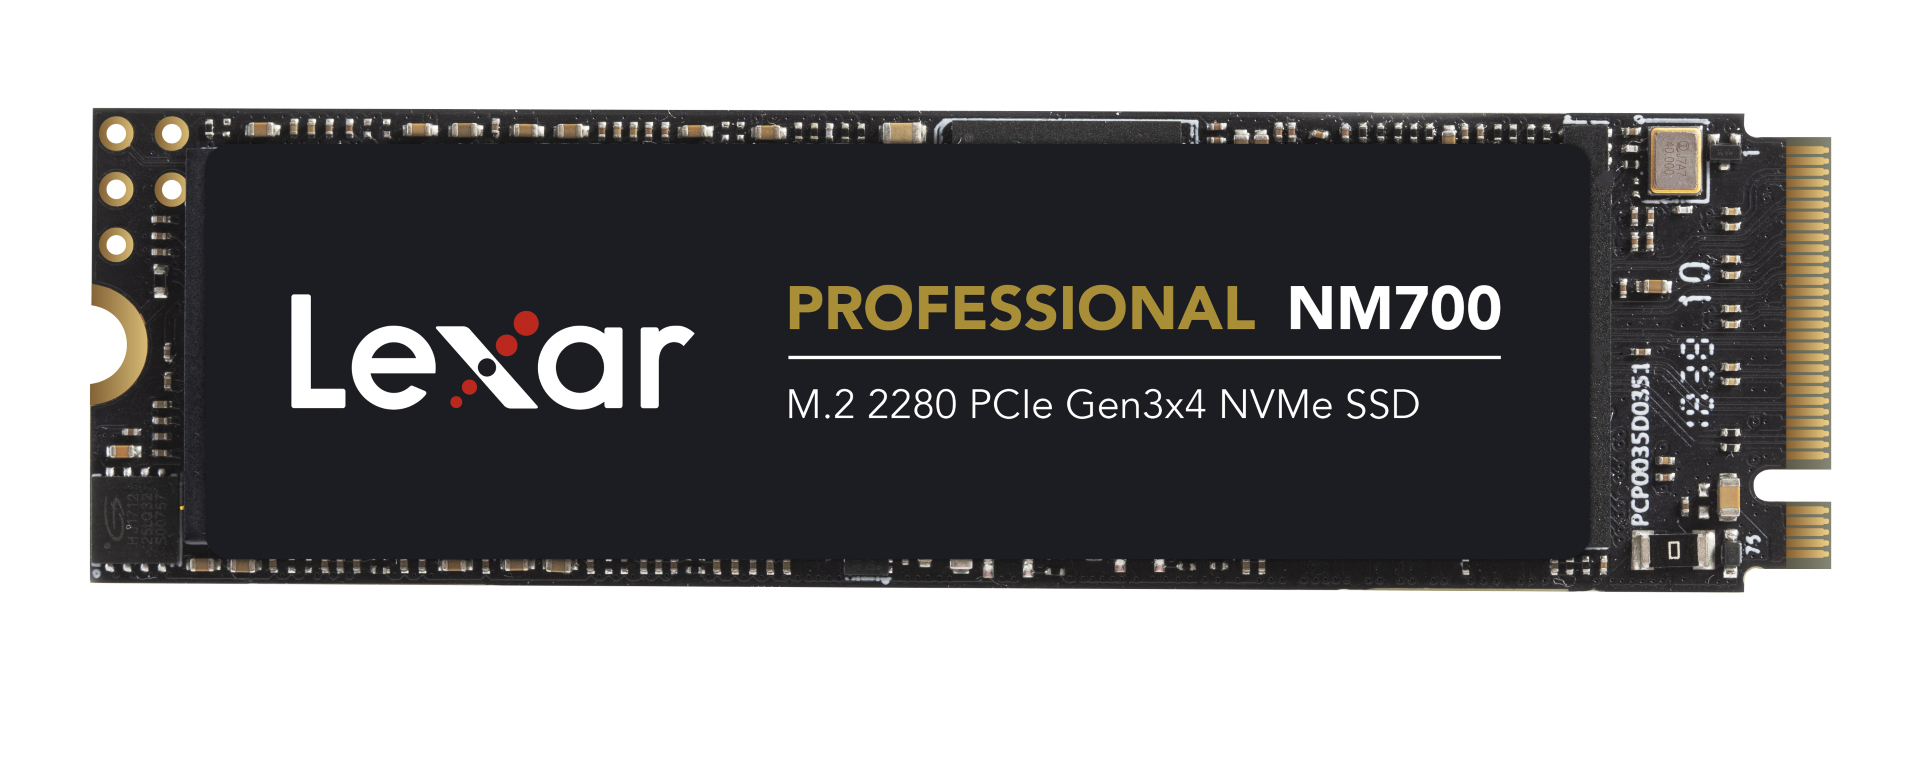 Lexar launches NM700 NVMe M.2 series with speeds of up to 3500 MB/s